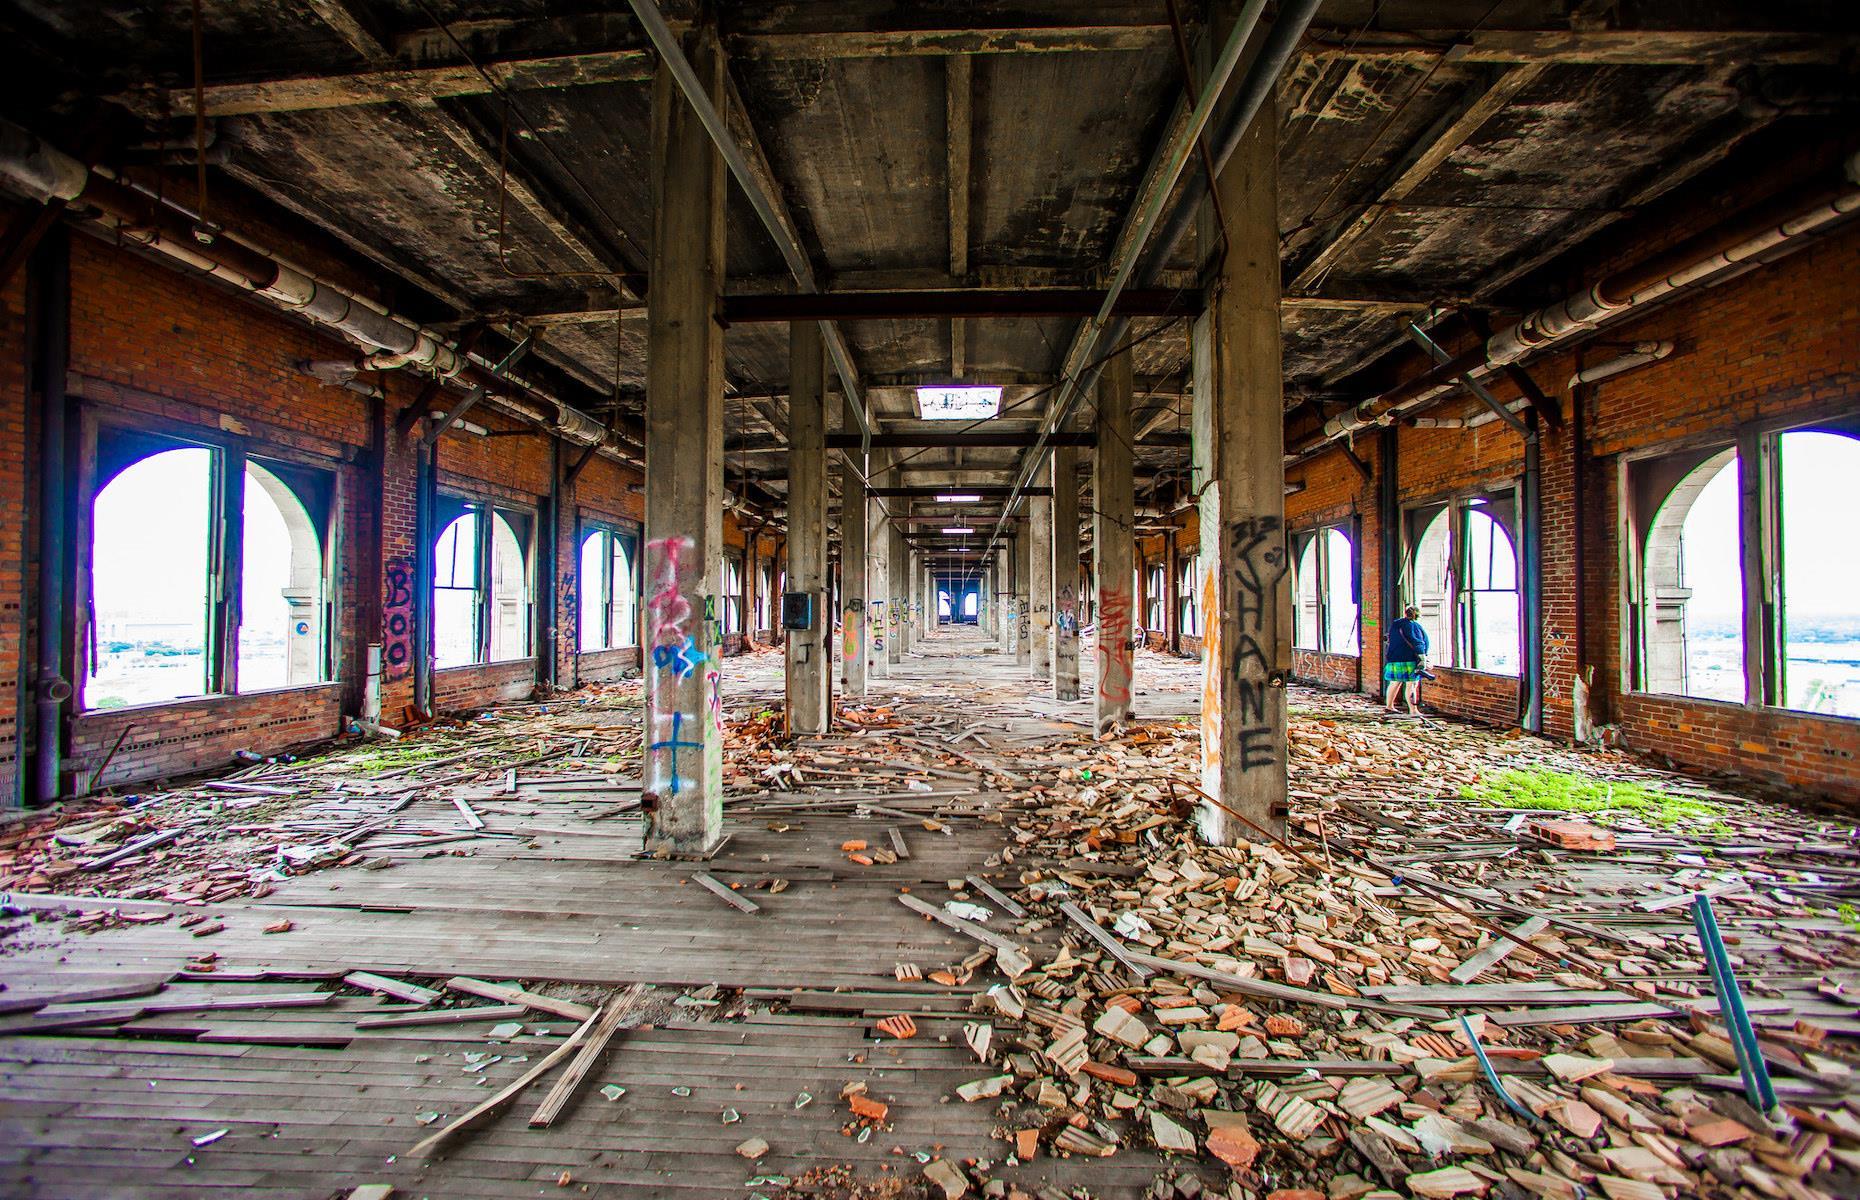 A grand train station left to decay, USA